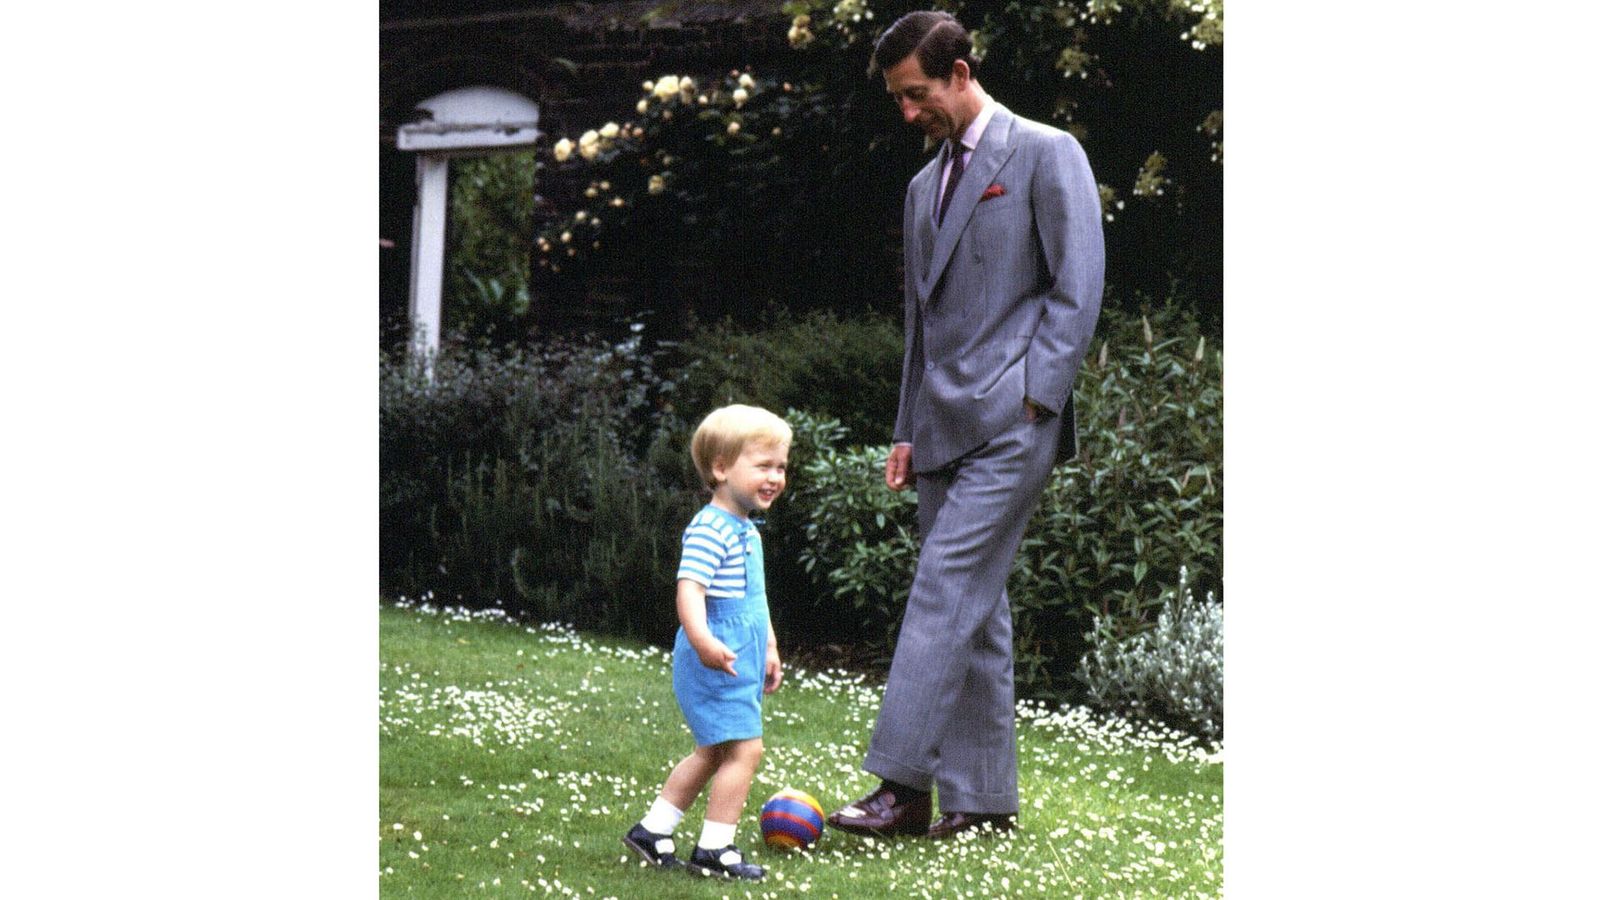 Prince William posts picture of him as a boy playing football with King to mark Father's Day